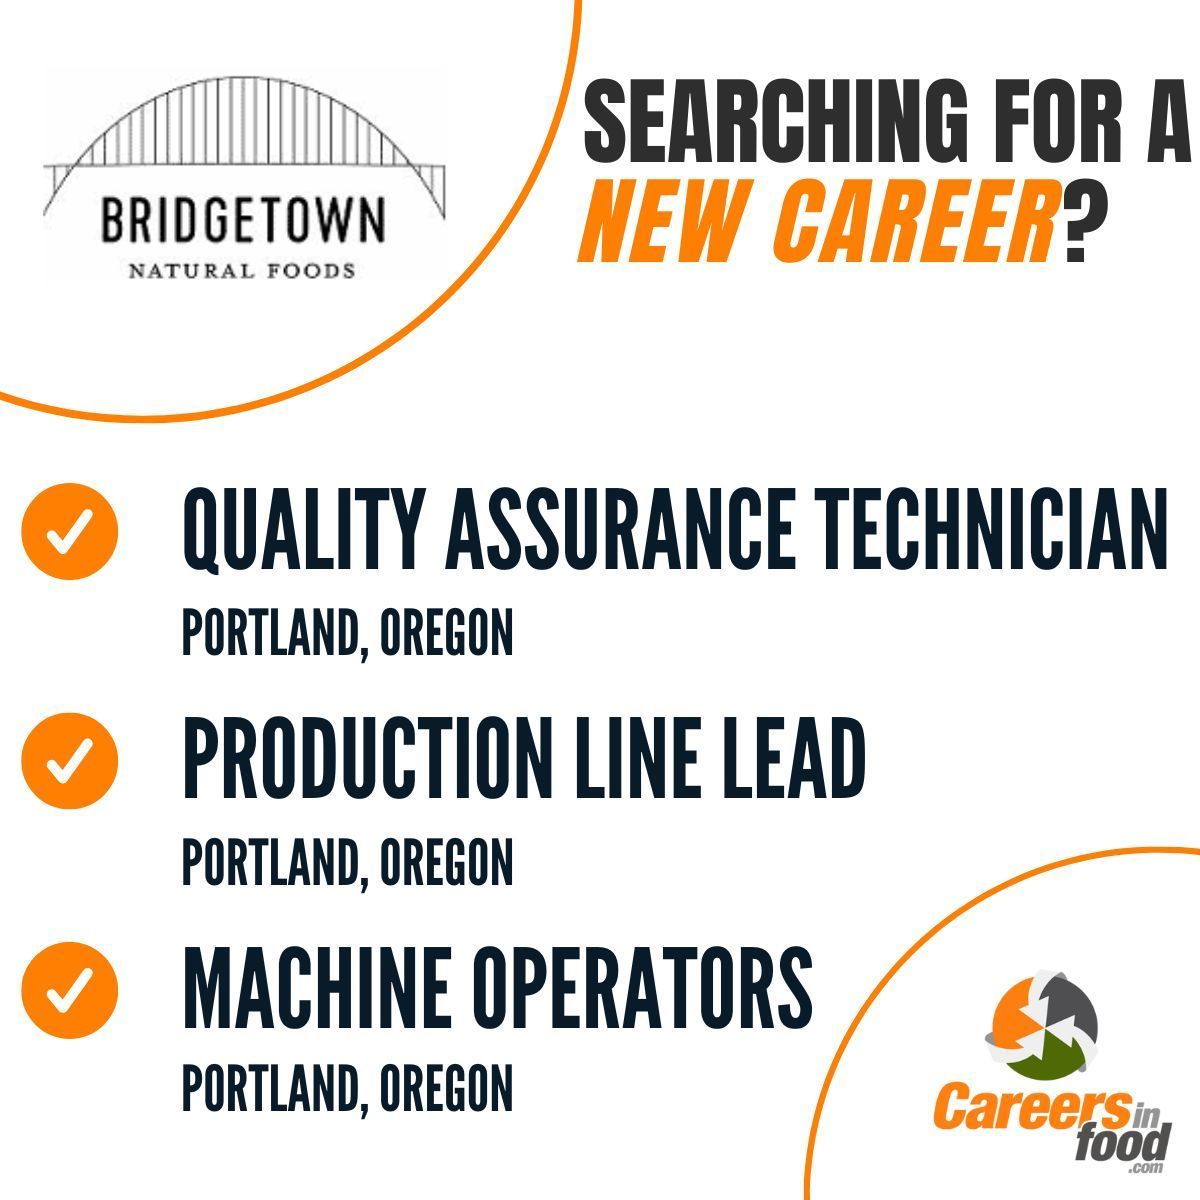 Join the team at Bridgetown Natural Foods in #Portland, Oregan!

View job opportunities at a Quality Assurance Technician, Production Line Lead, and Machine Operators.

Apply here: careersinfood.com/bridgetown-nat… 

#QualityAssurance #ProductionJobs #Jobs #JobSeekers #Hiring #ApplyNow